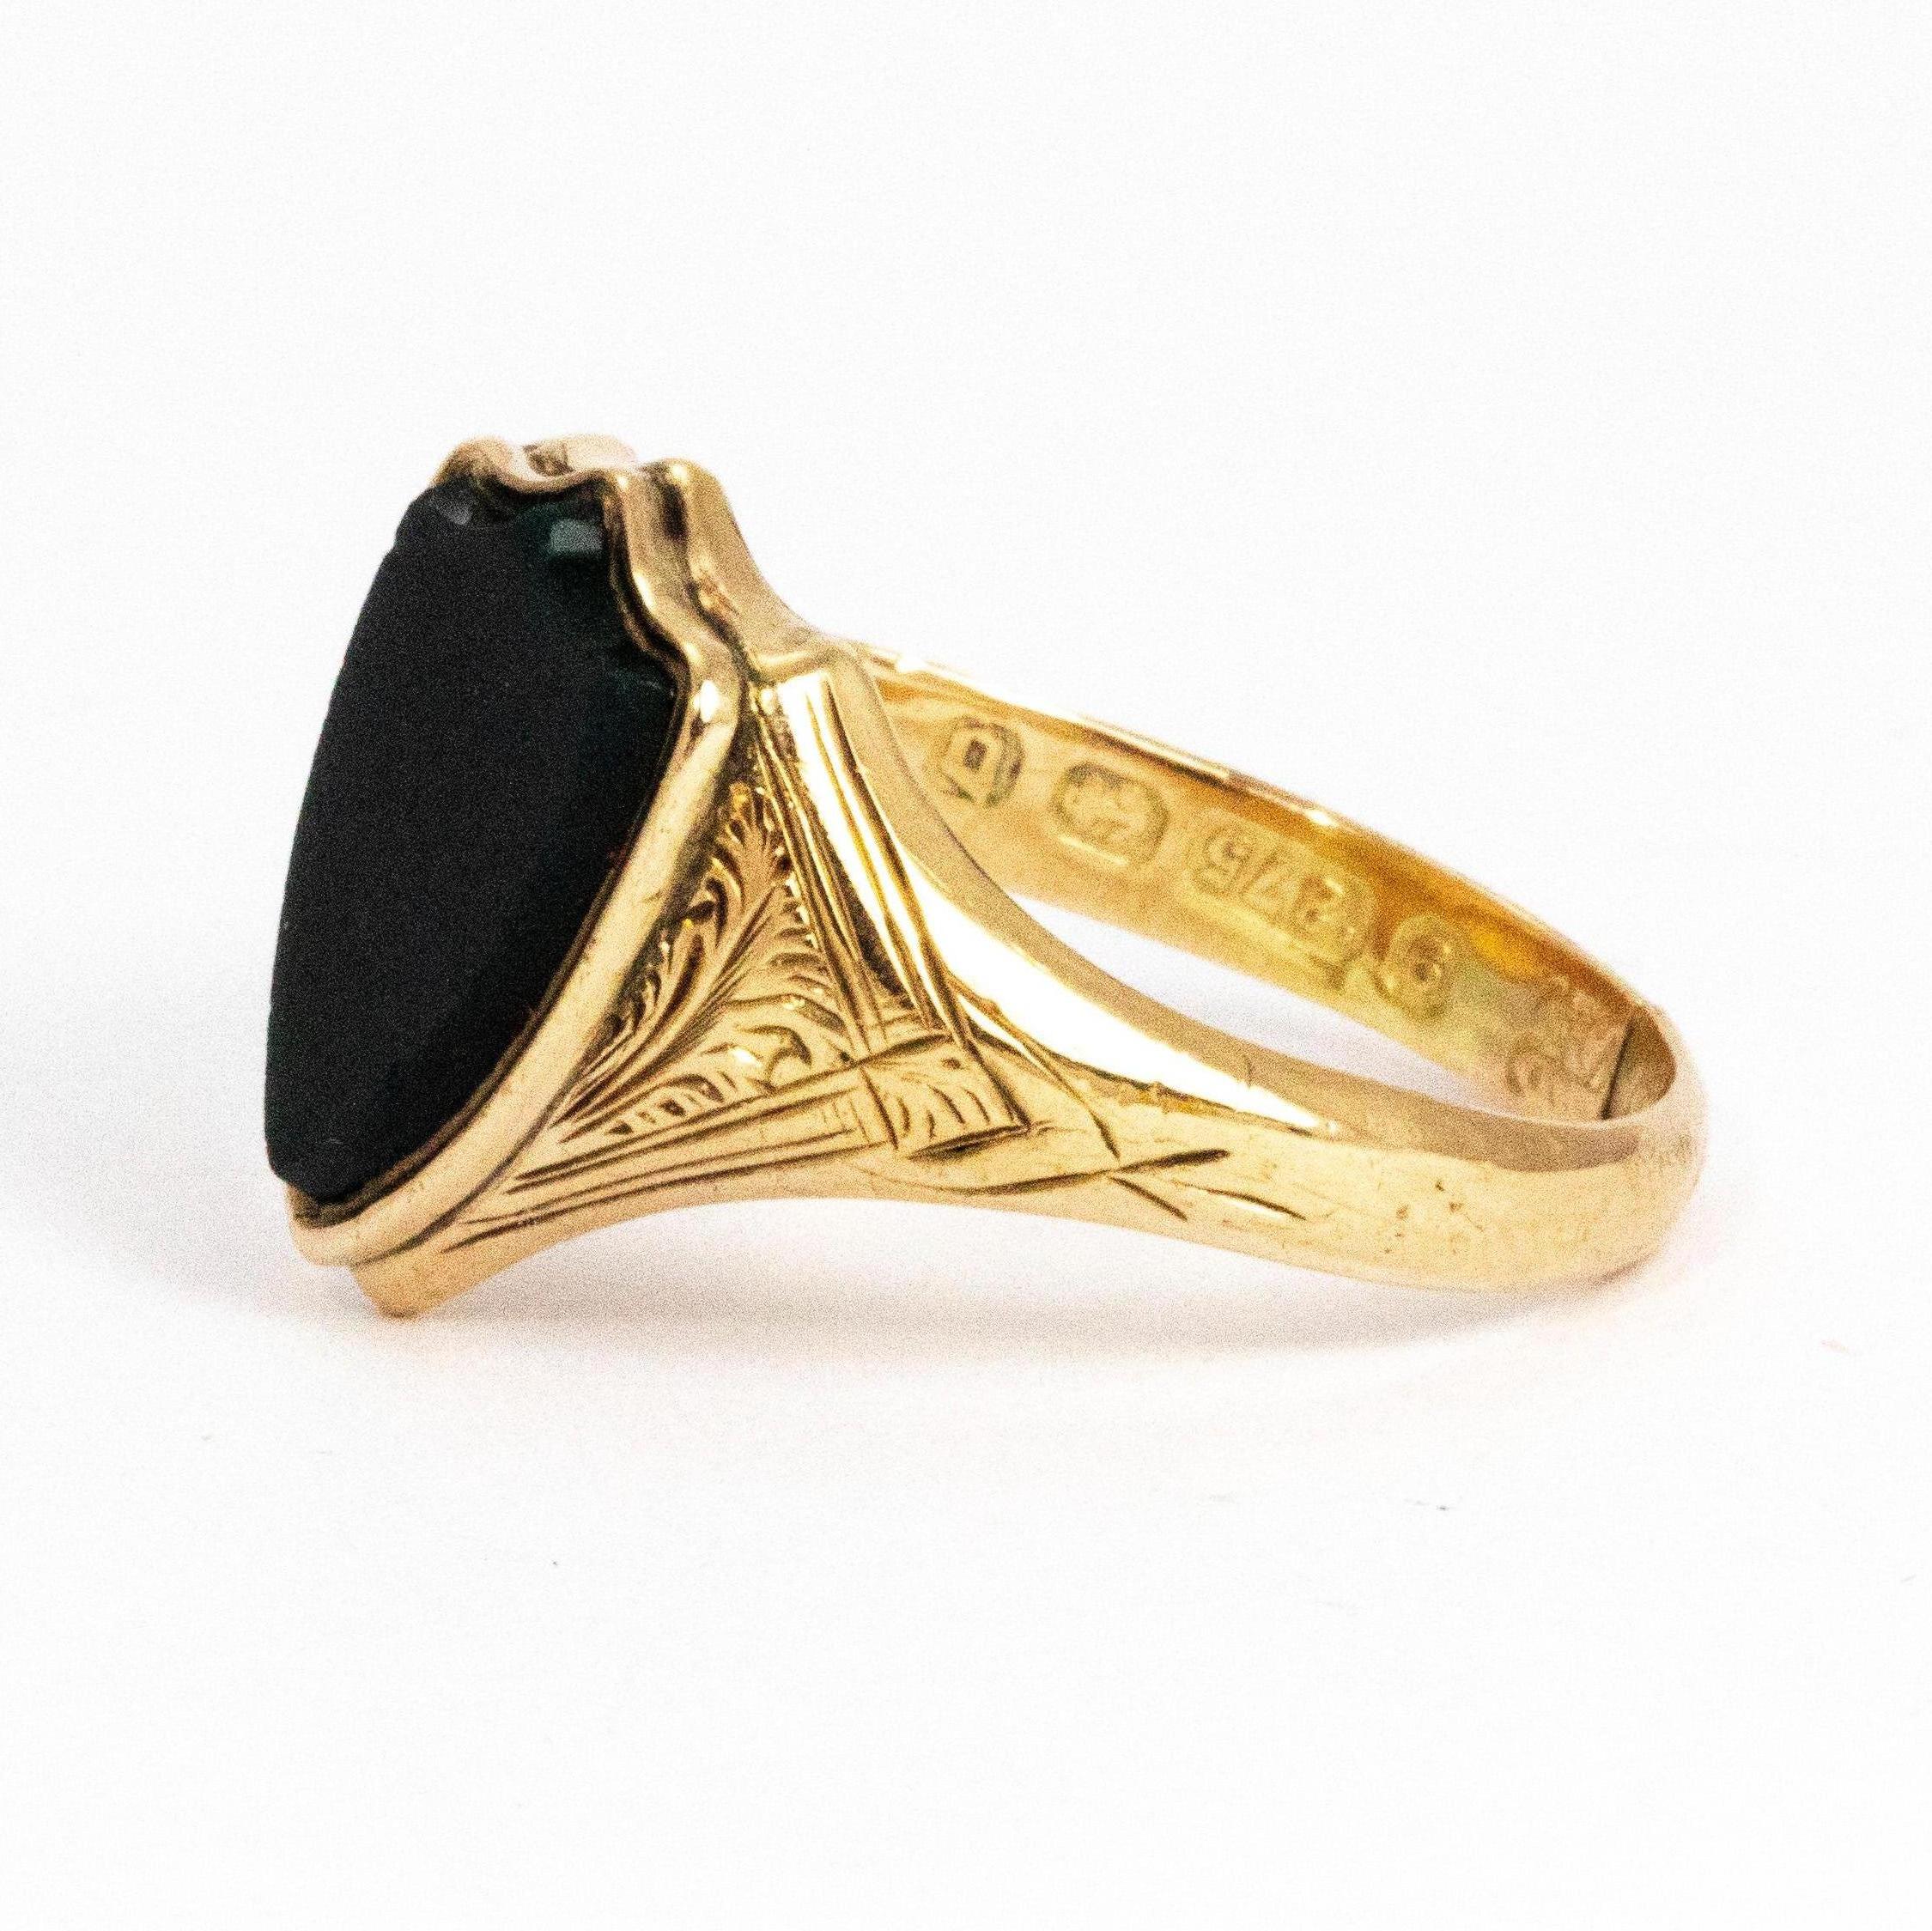 Modelled in 9ct gold this signet ring holds a gorgeous glossy bloodstone in the shape of a shield. The shoulders are beautifully engraved with leaf and scroll detail. Made in Birmingham, England.

Size: Q or 8 
Width Widest Point: 13.5 mm 